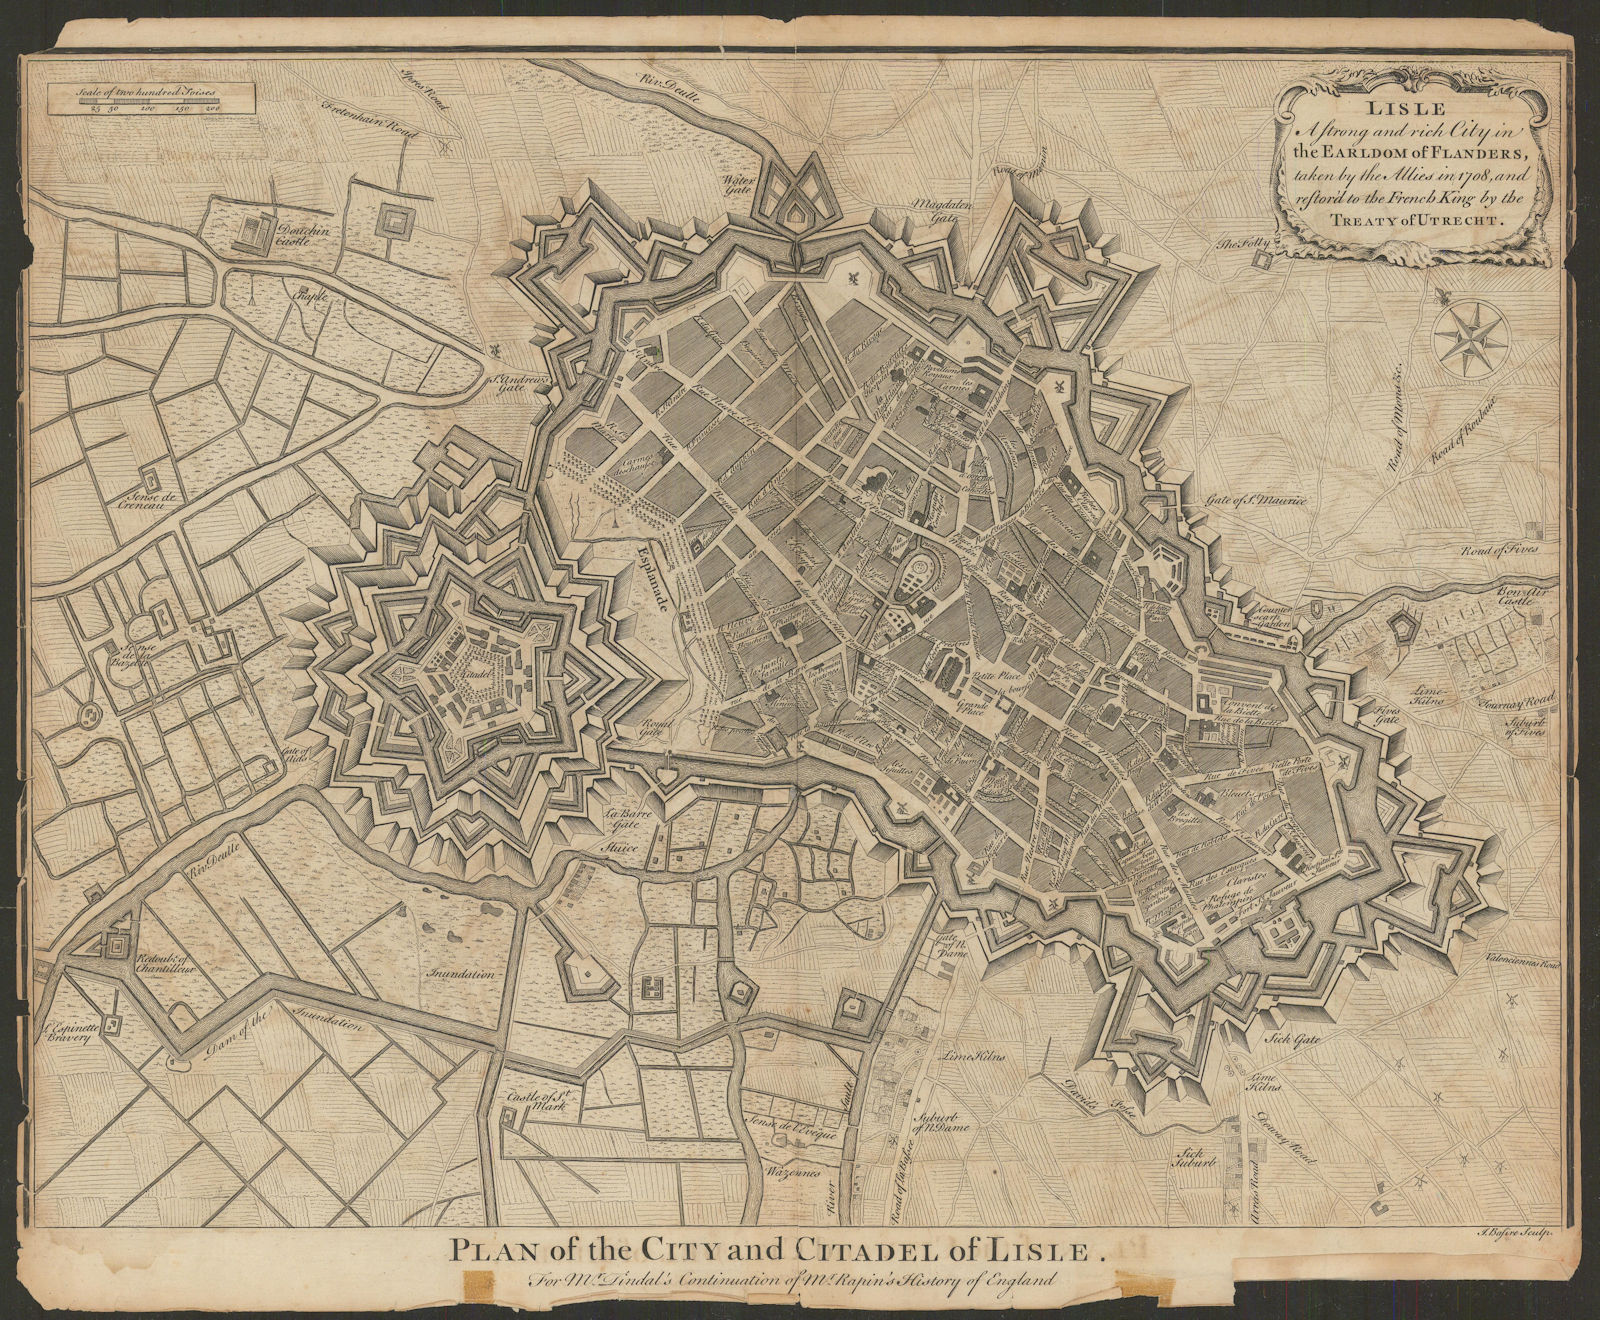 Associate Product Plan of the City & Citadel of Lisle a strong & rich city… Lille BASIRE c1759 map